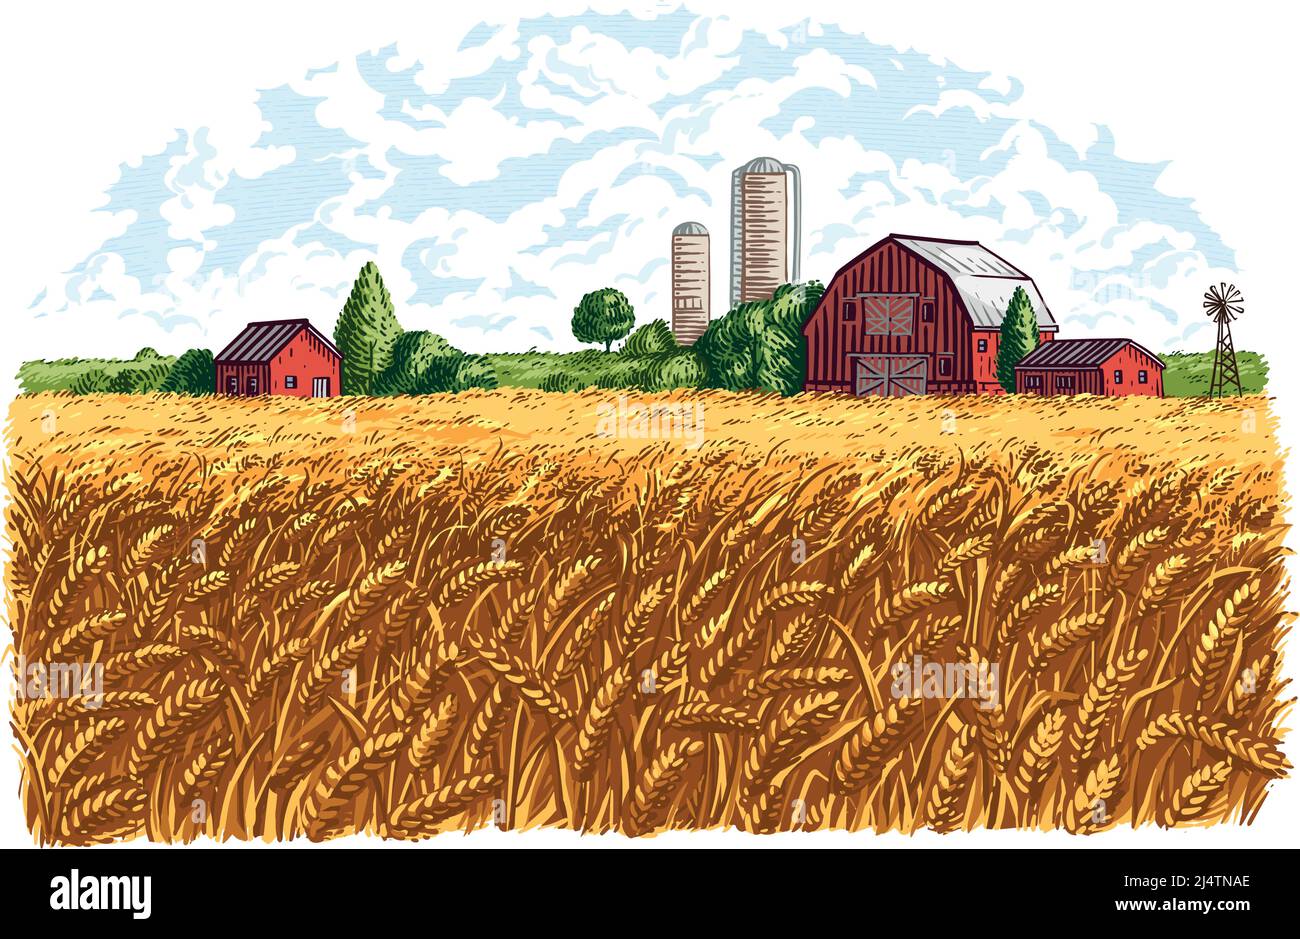 Pencil drawing agriculture Stock Photos Royalty Free Pencil drawing  agriculture Images  Depositphotos